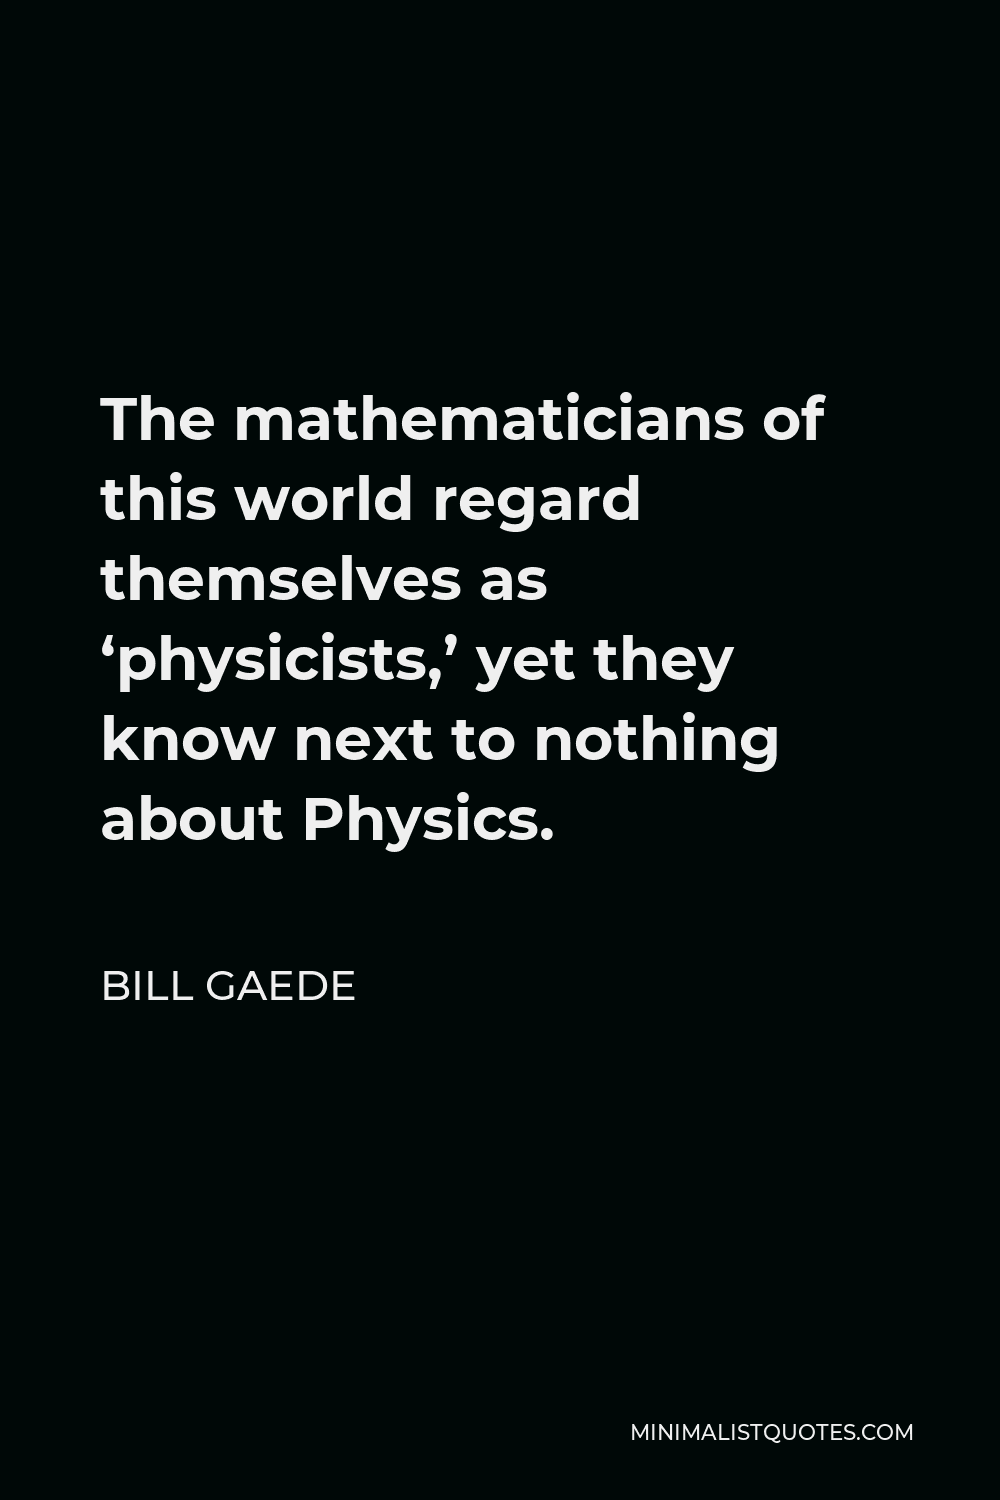 Bill Gaede Quote - The mathematicians of this world regard themselves as ‘physicists,’ yet they know next to nothing about Physics.